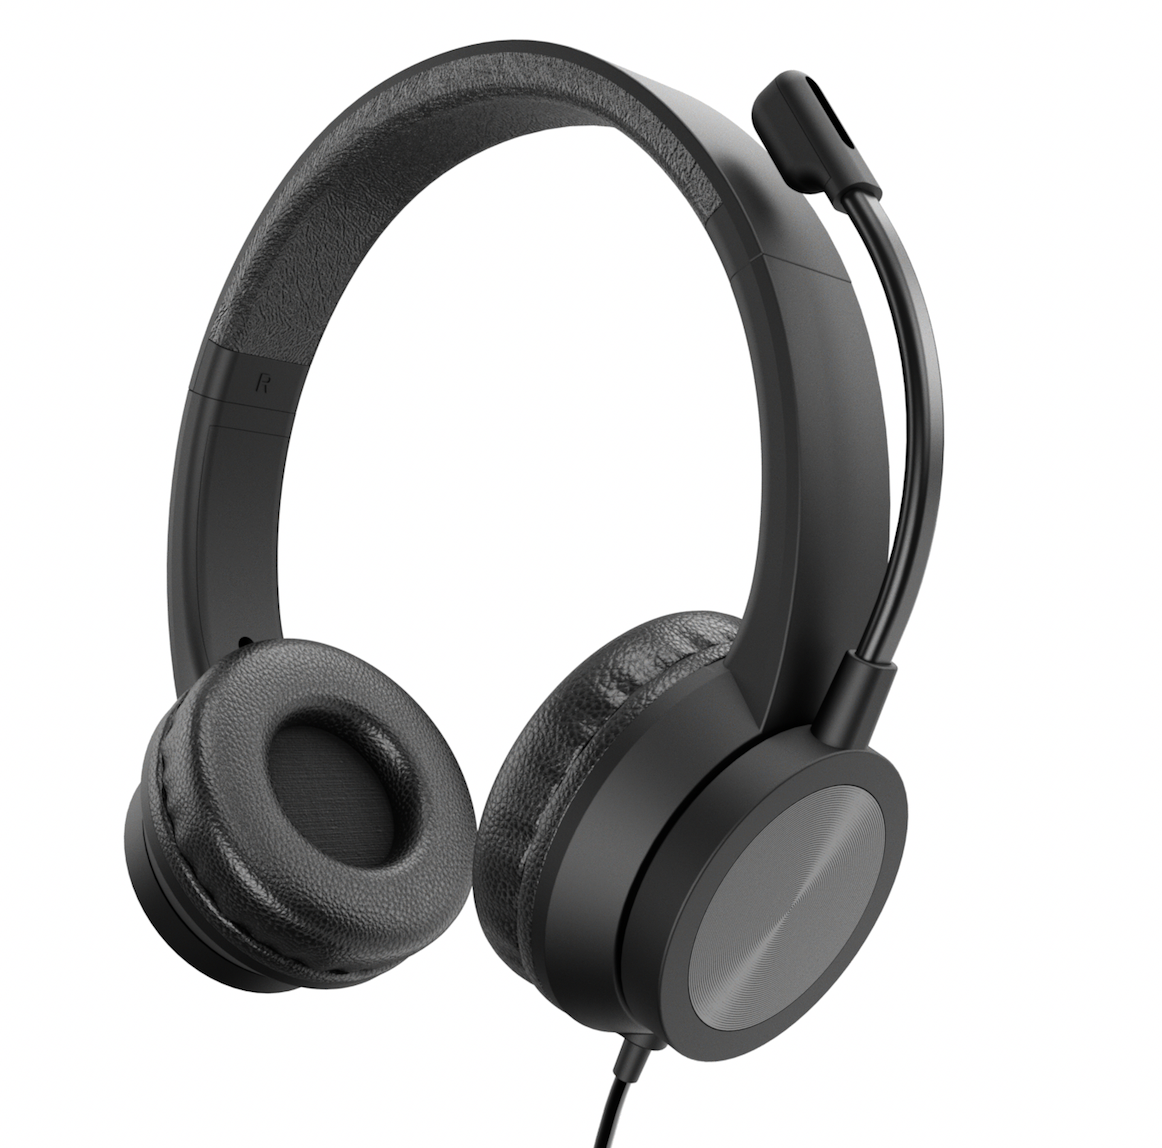 Call Center Headset with noise cancelling Mic PC-113